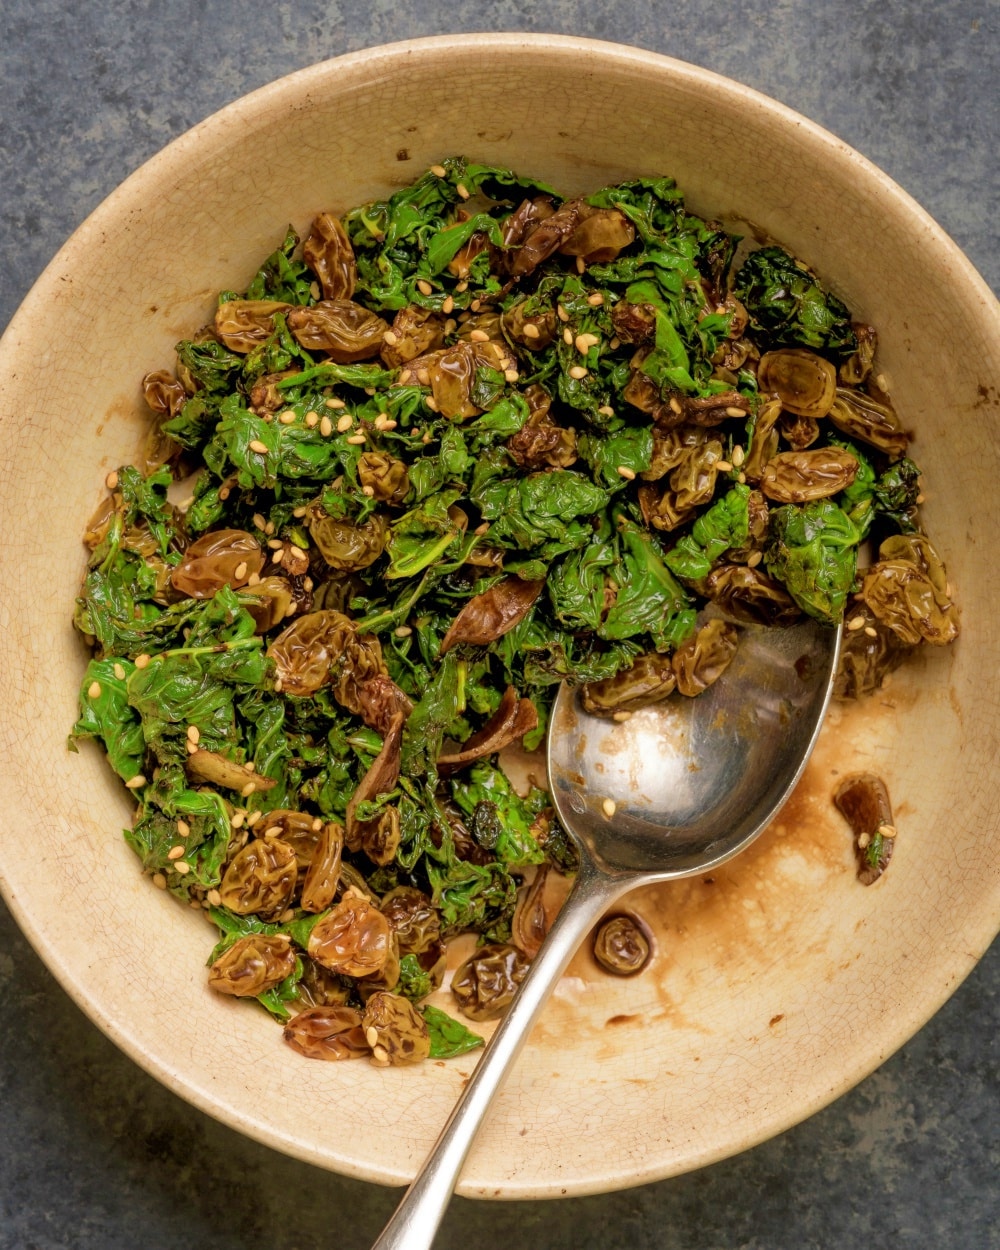 Kale-Side-Dish-with-Raisins-and-Toasted-Sesame-Seeds